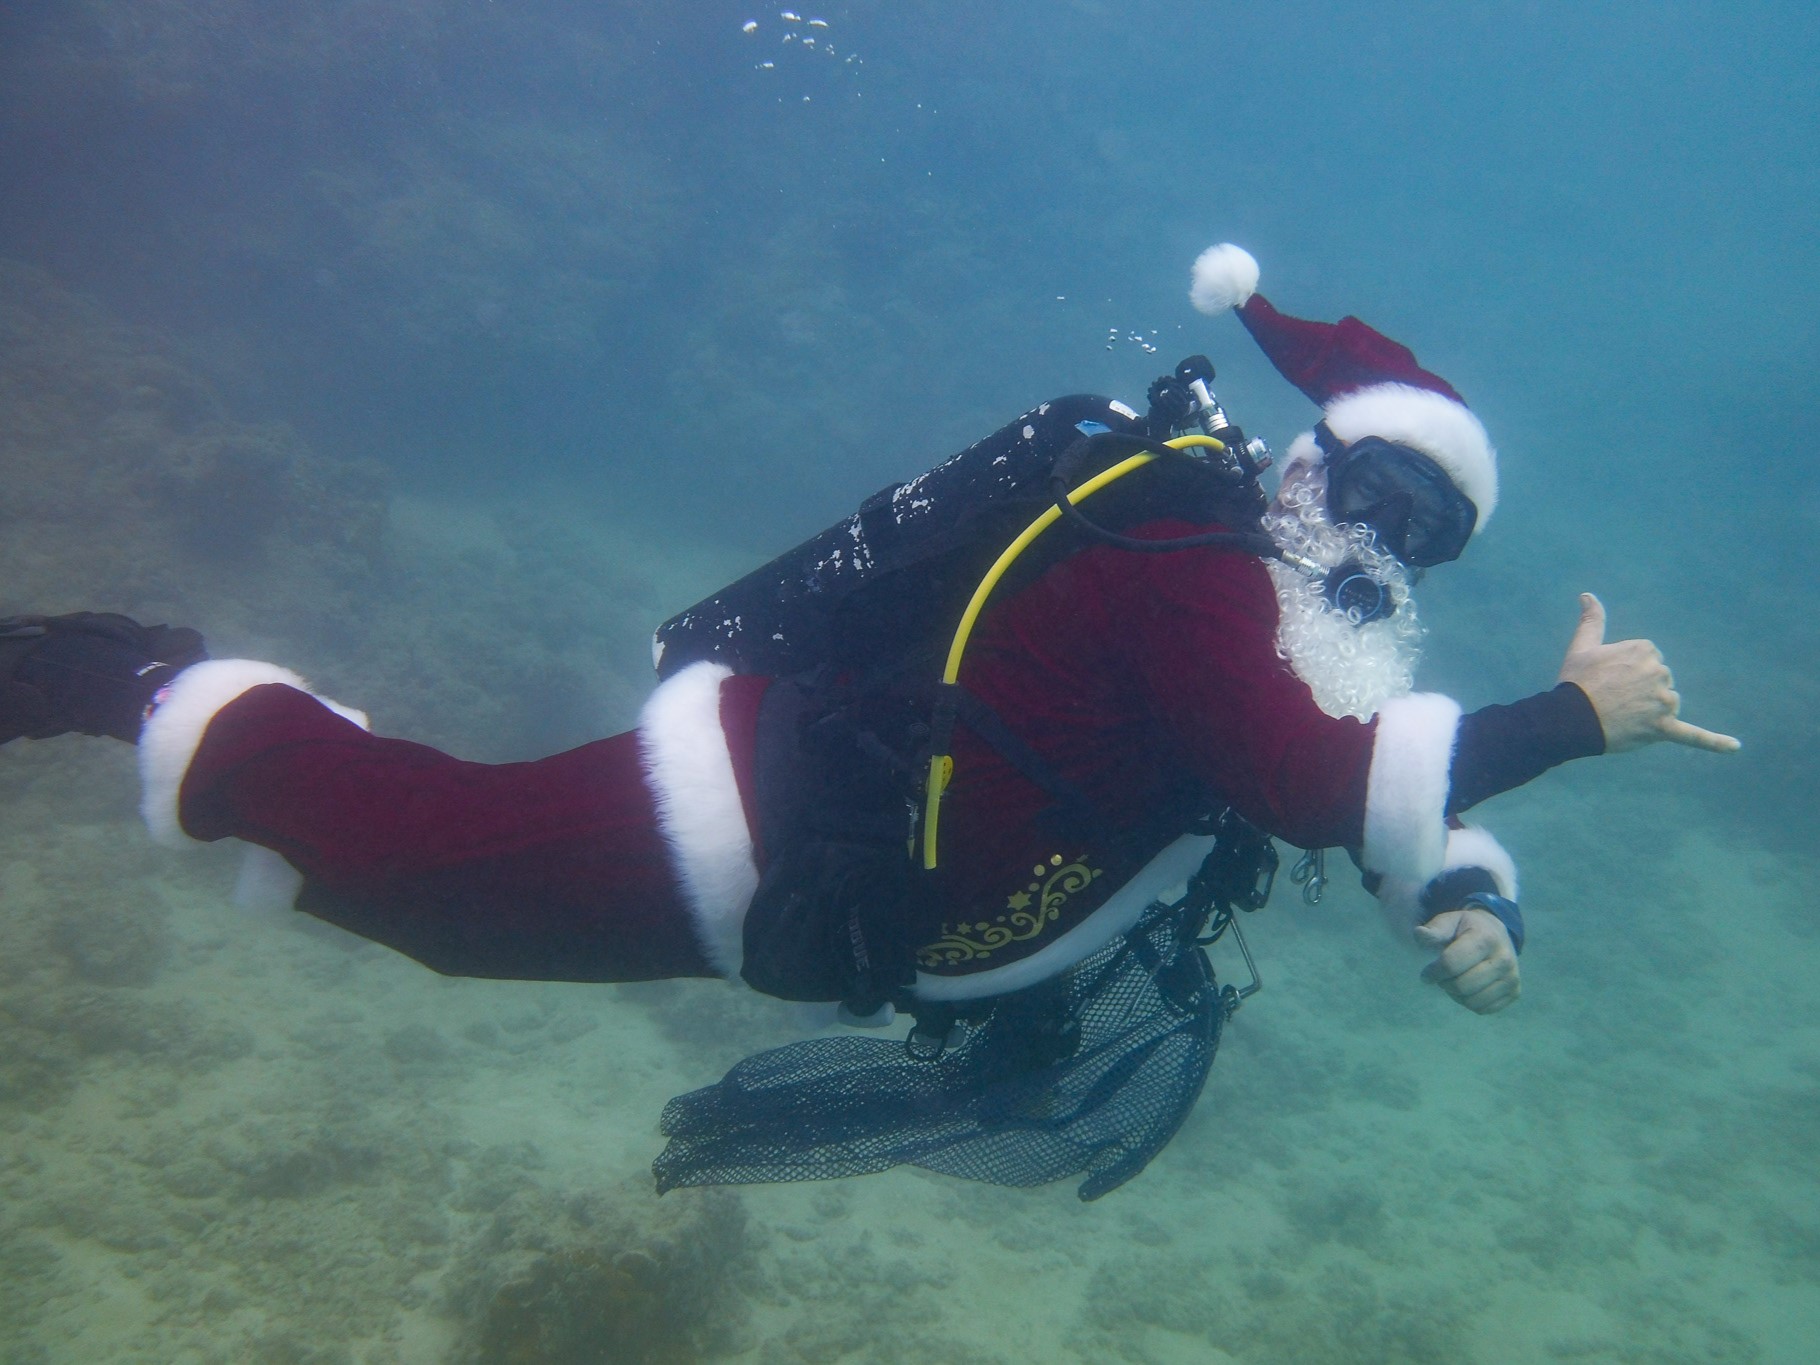 Santa scuba diving and giving a shaka sign with his right hand